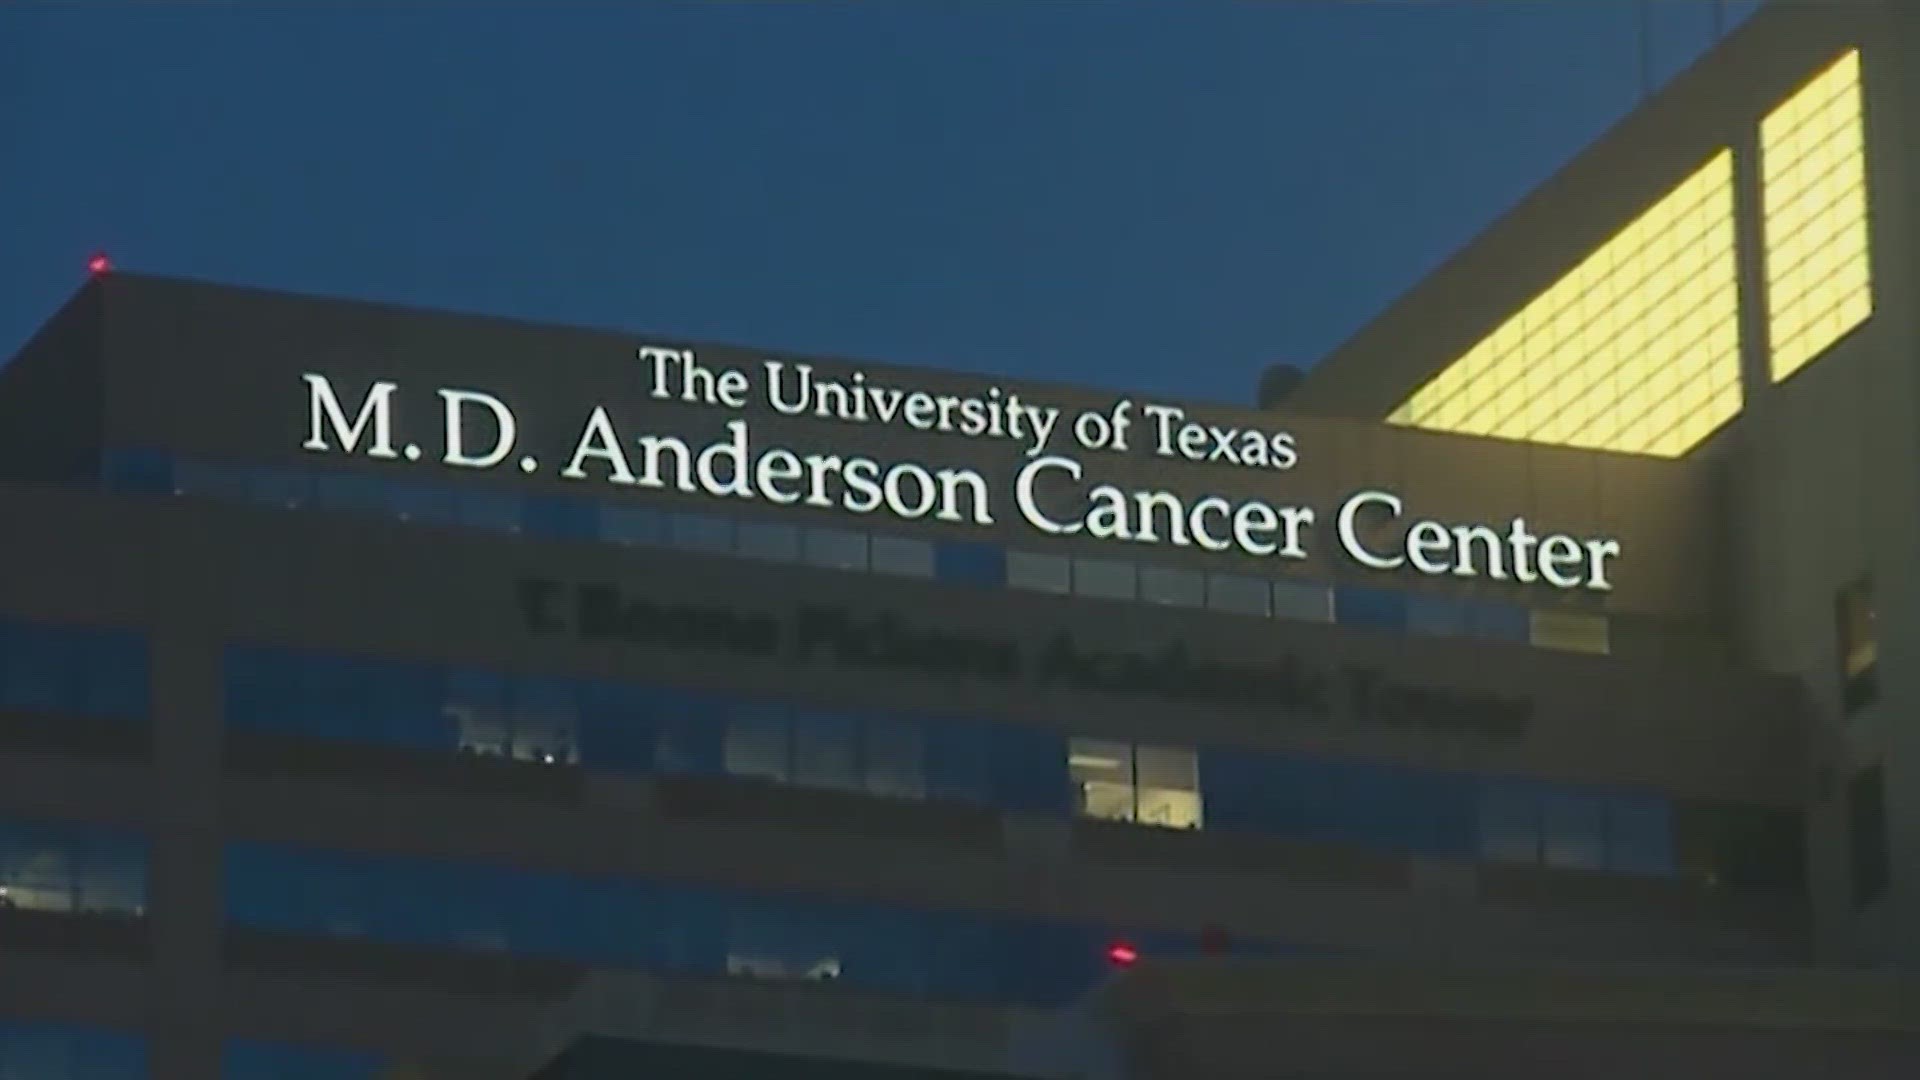 MD Anderson Cancer Center in Houston has been chosen as a site for the third phase of a cancer vaccine clinical trial.